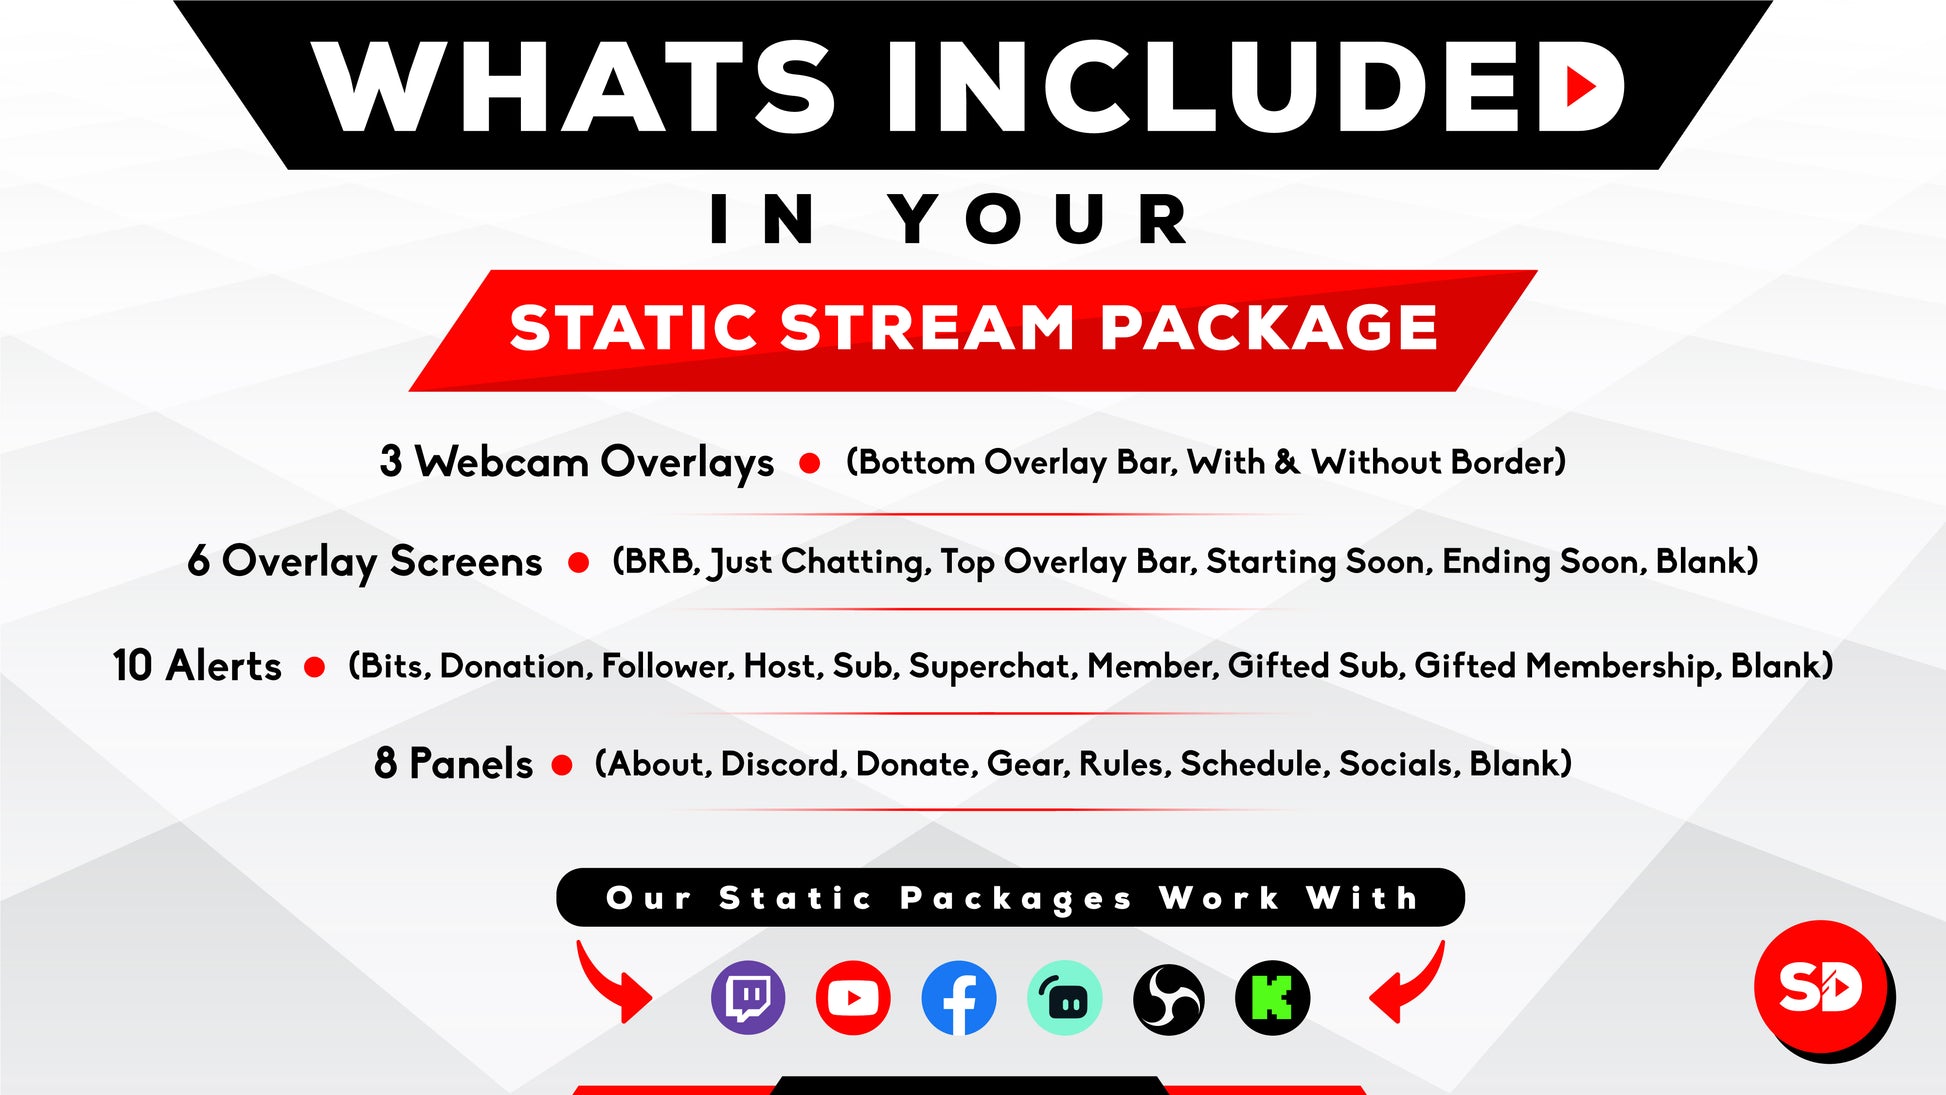 whats included in your package - static stream package - green arrow